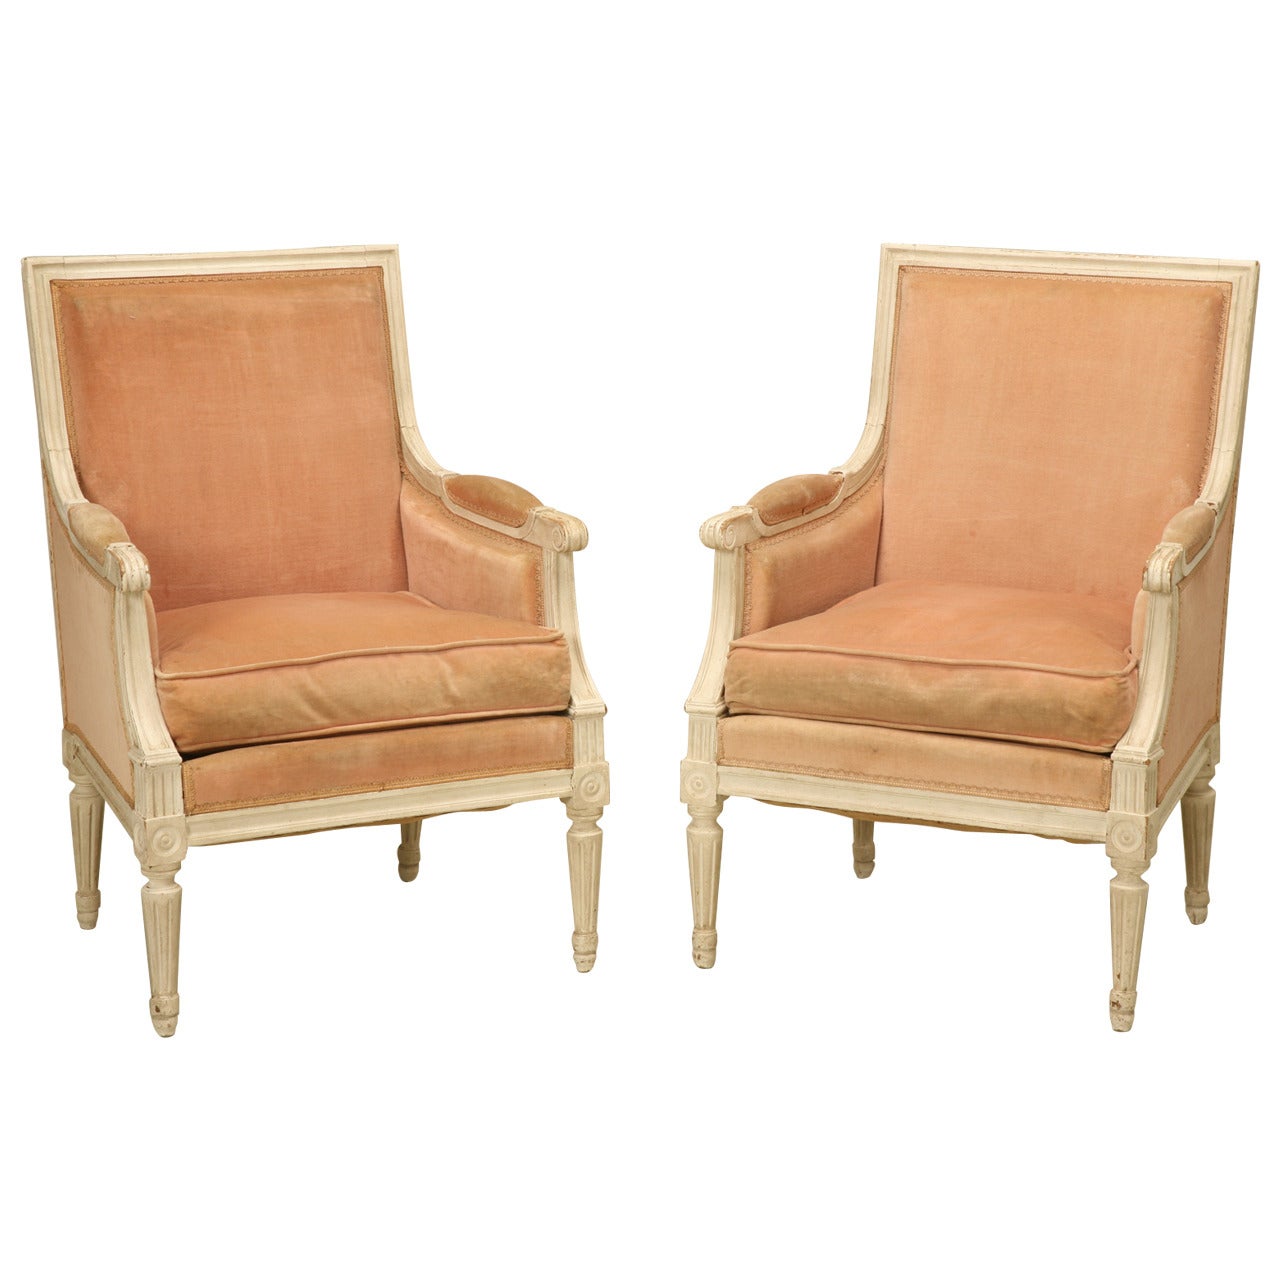 French Louis XVI Style Bergere Chairs in Original Paint